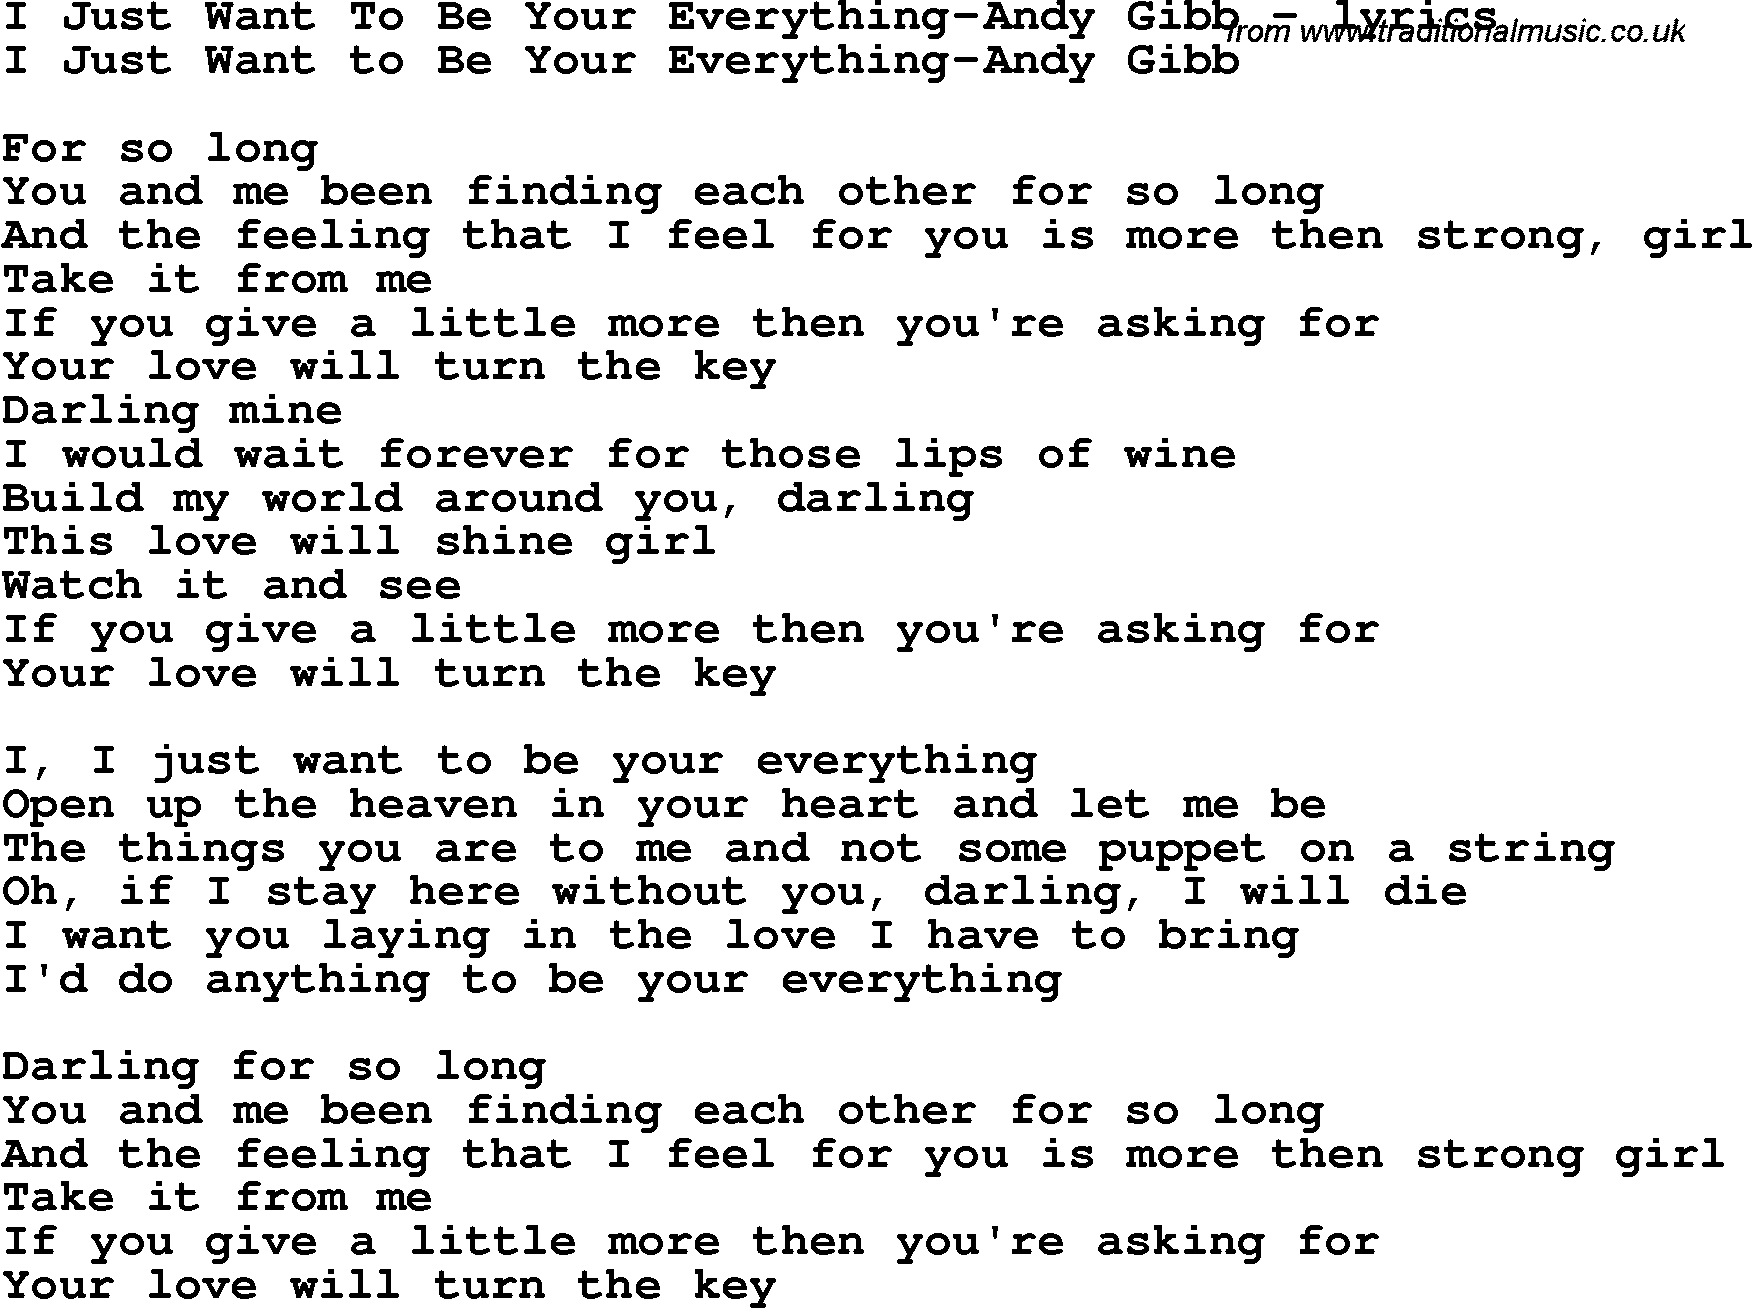 Love Song Lyrics for: I Just Want To Be Your Everything-Andy Gibb